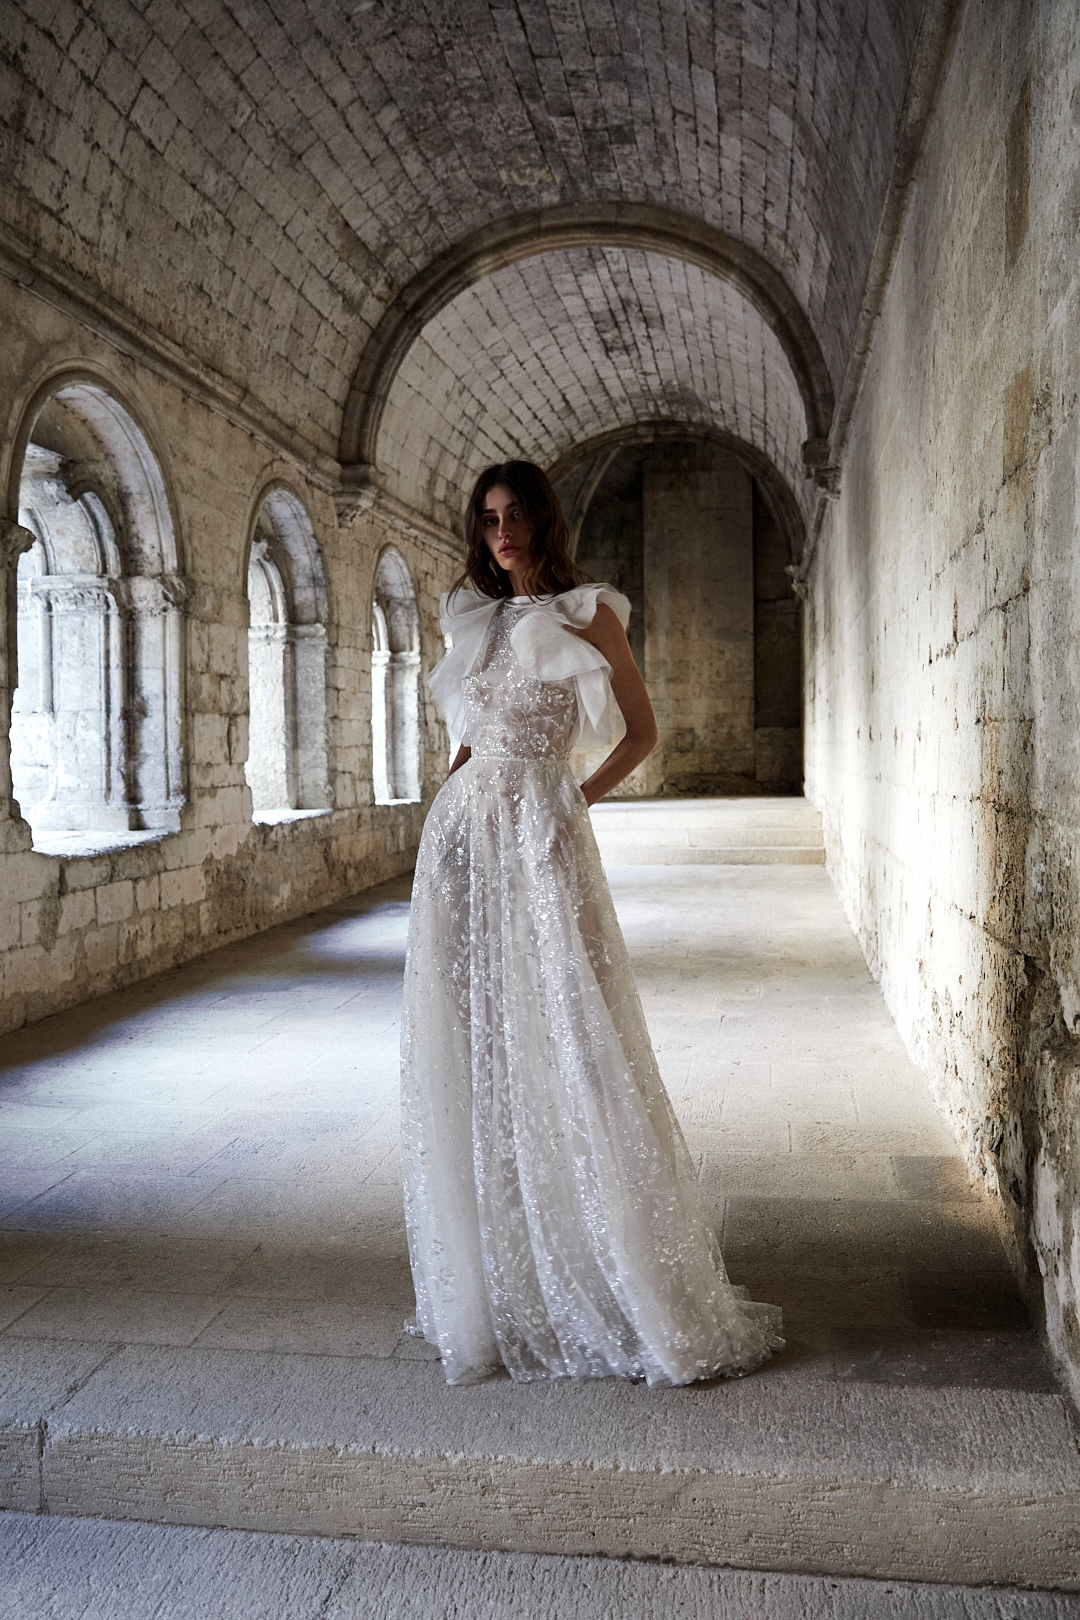 Wedding Inspiration: Utterly Romantic & Ethereal Gowns